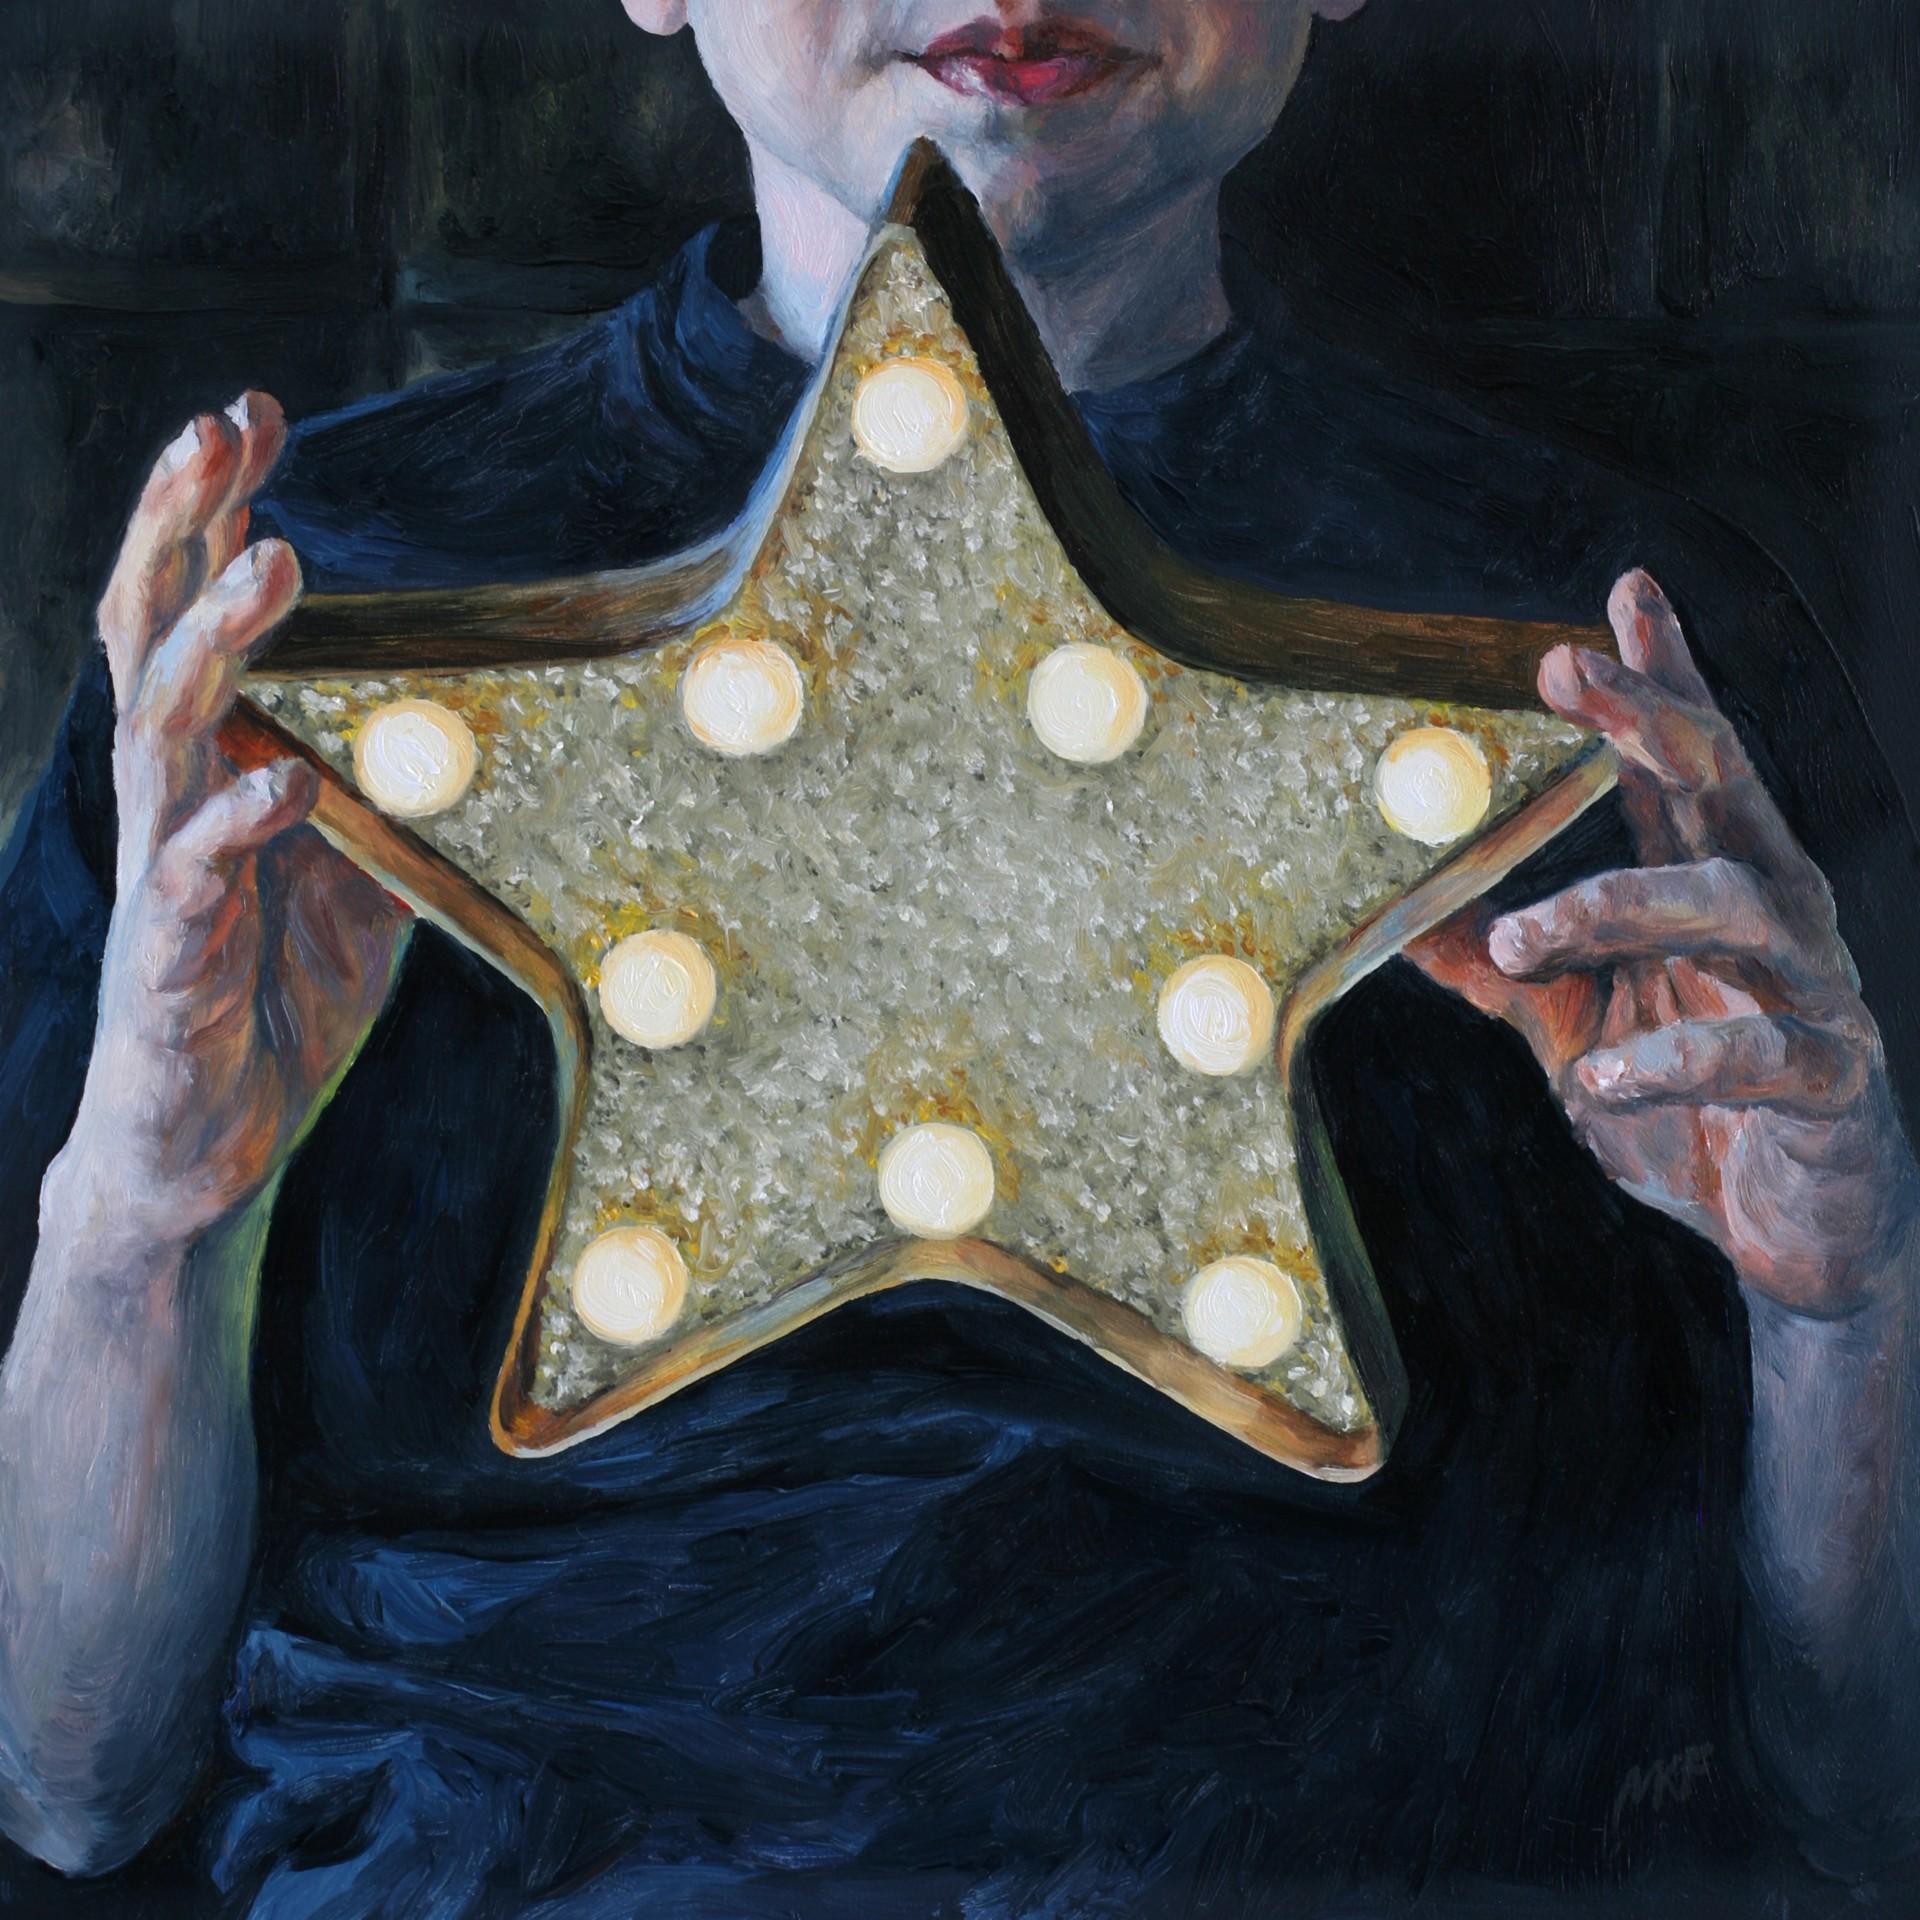 The Star in my hands